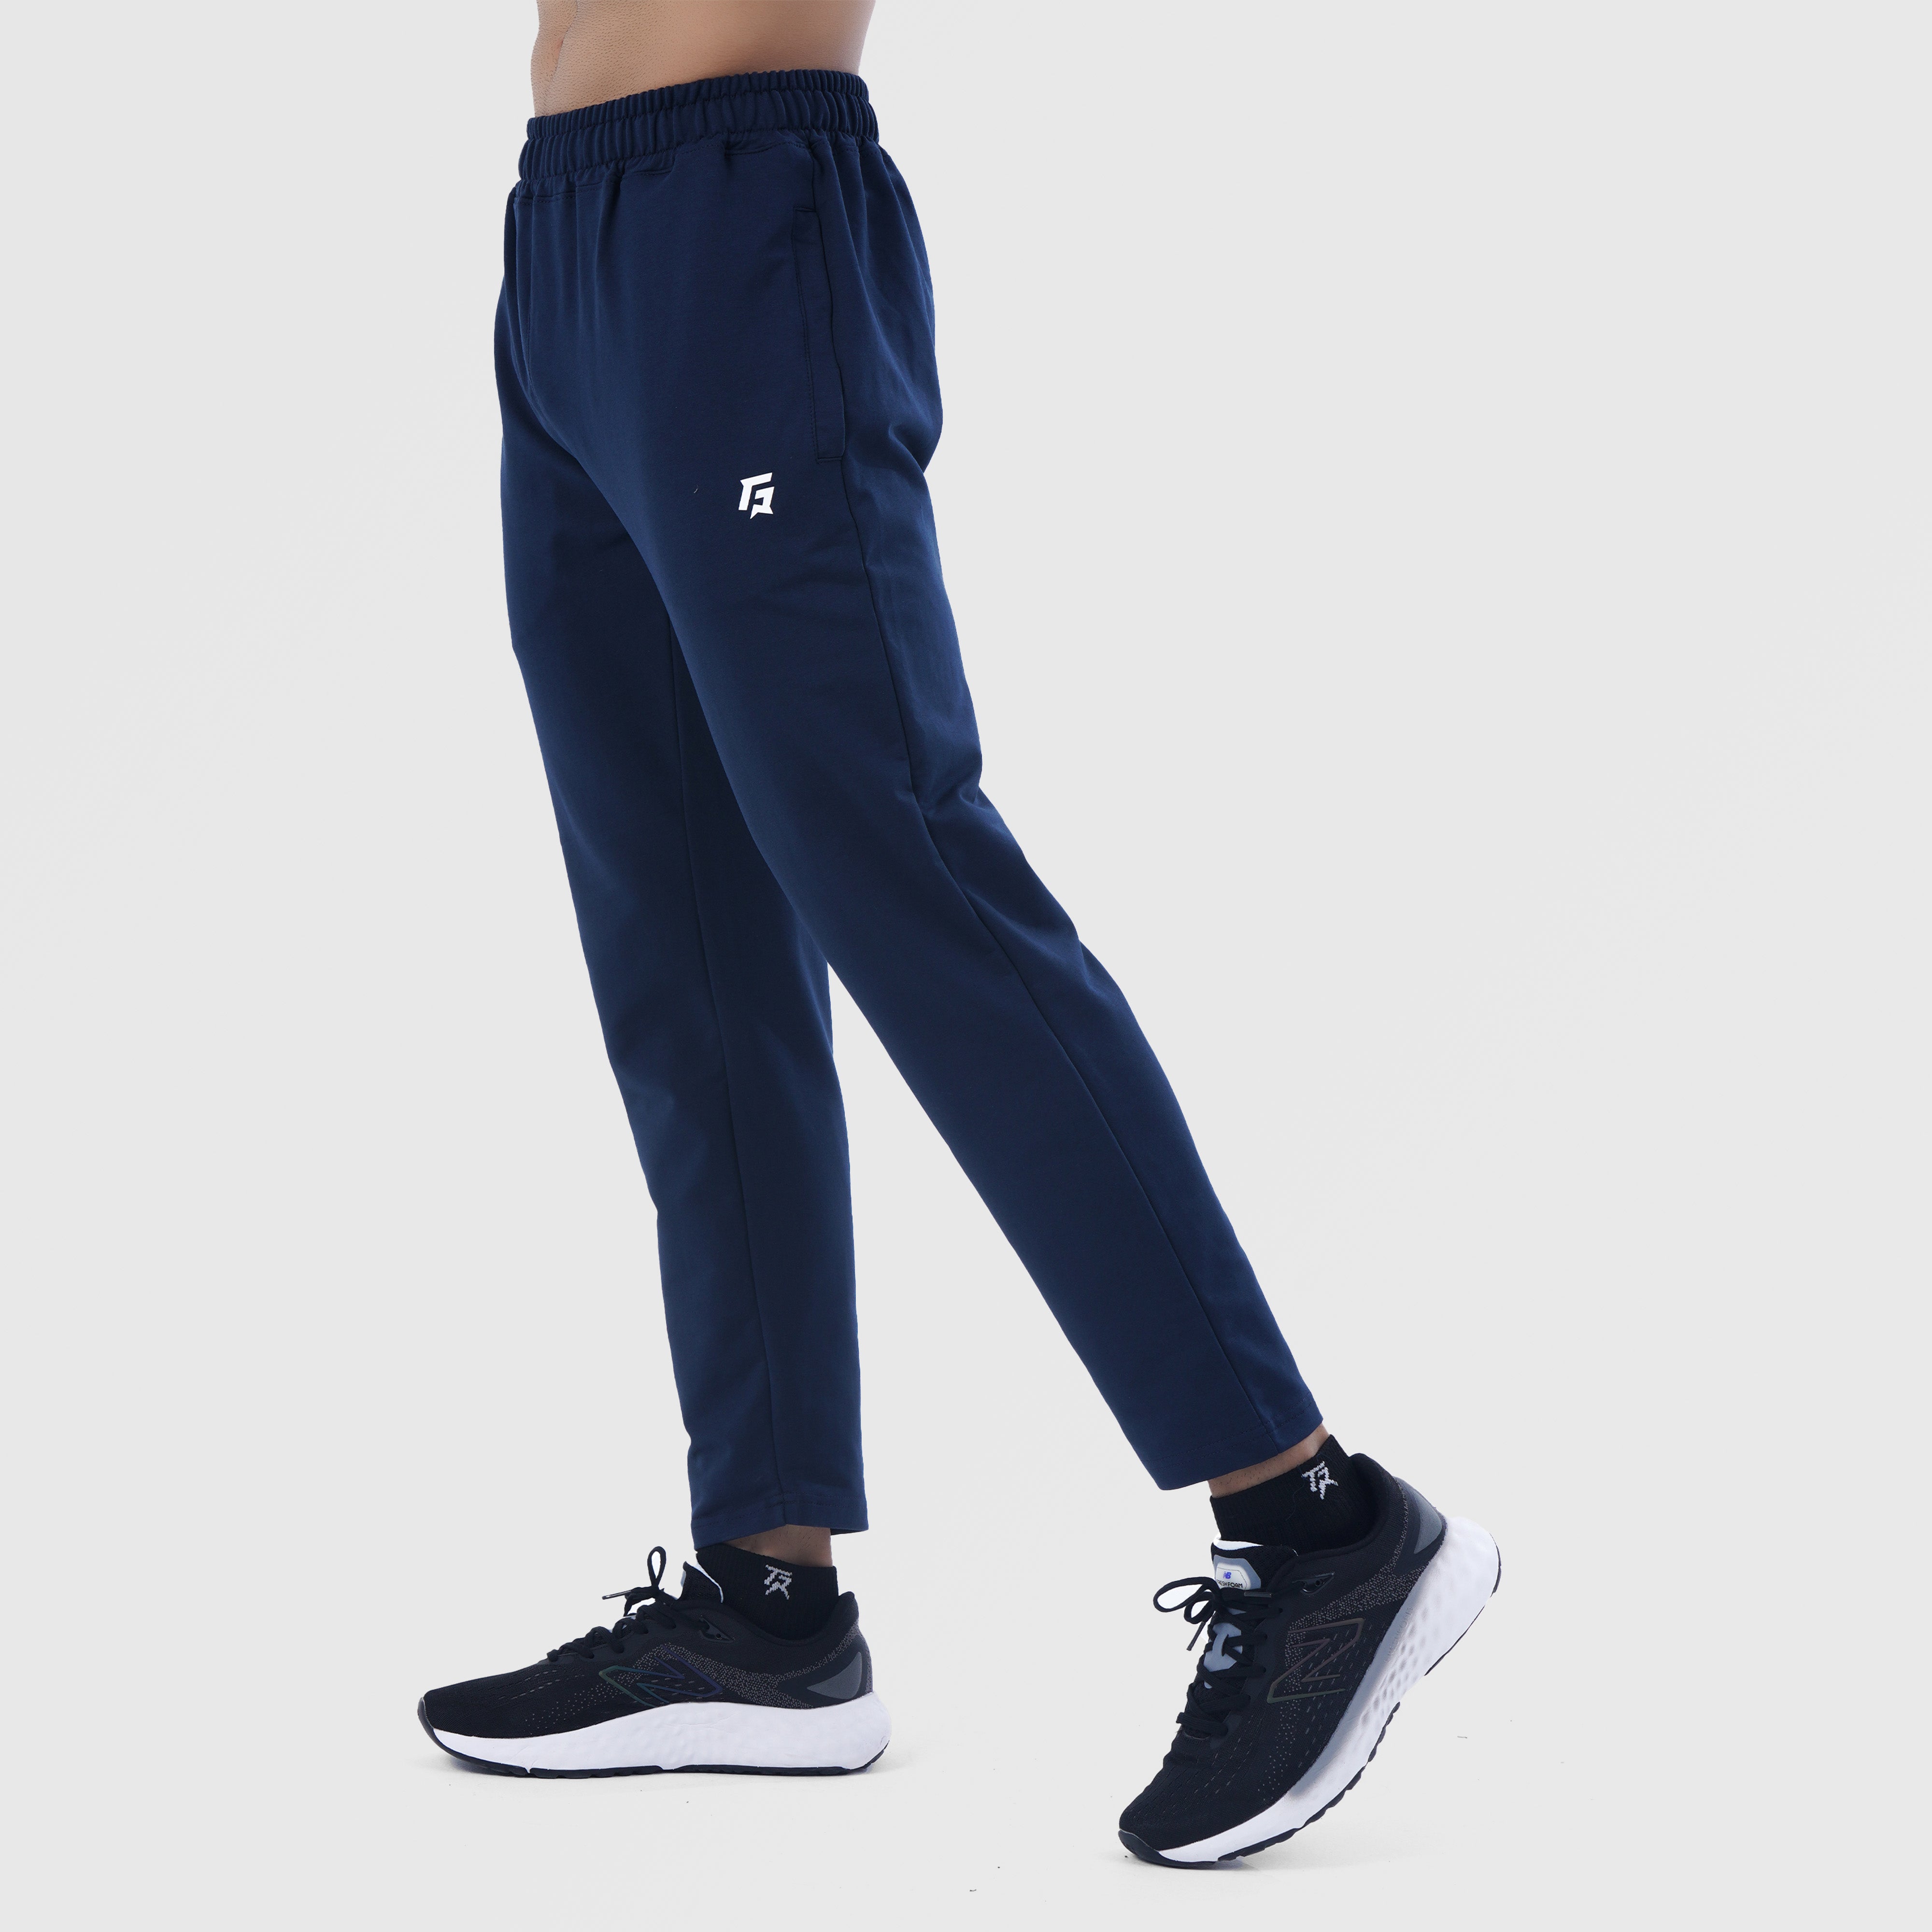 Ethno Trousers (Navy)